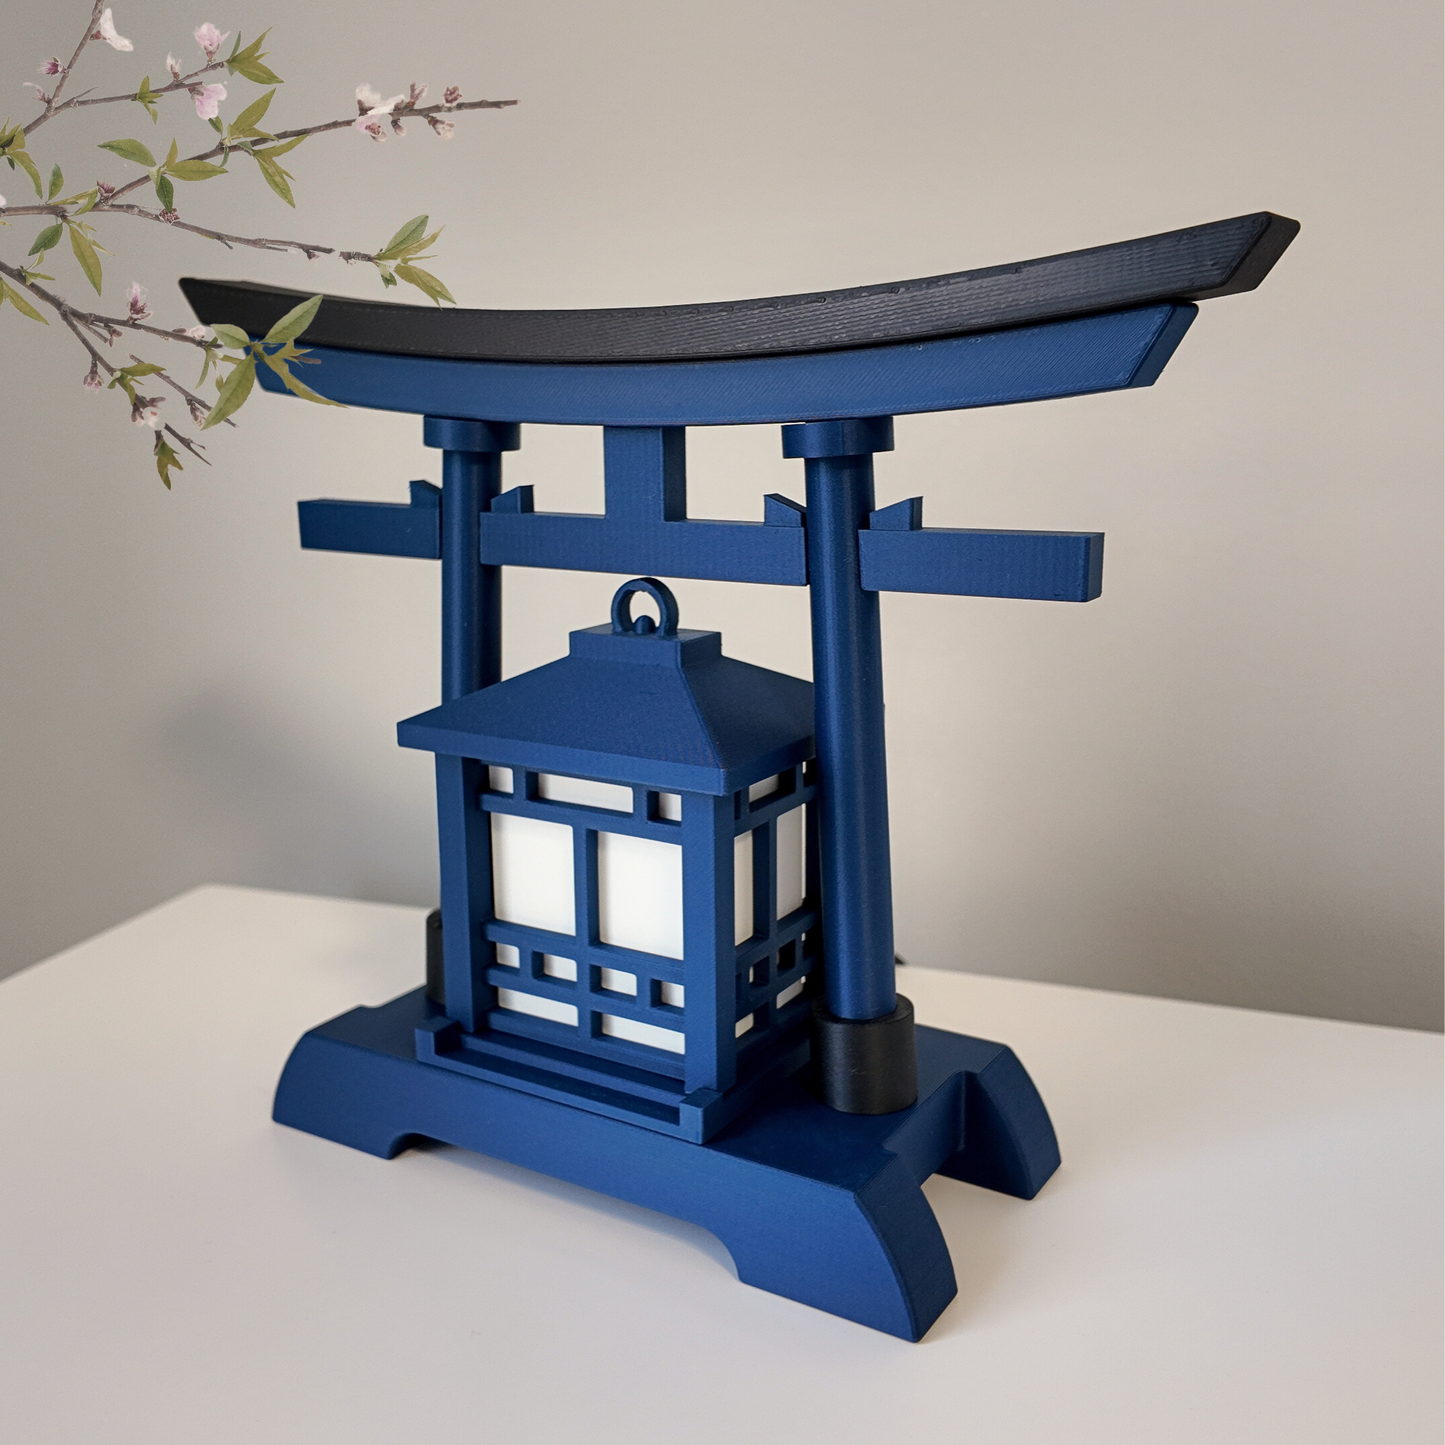 Japanese Torii Gate Lantern - Exquisite Japanese Decor for Home and Room | Unique Desk Lamp and Table Lamp Design | Mini Japanese Lantern Transforms Any Space